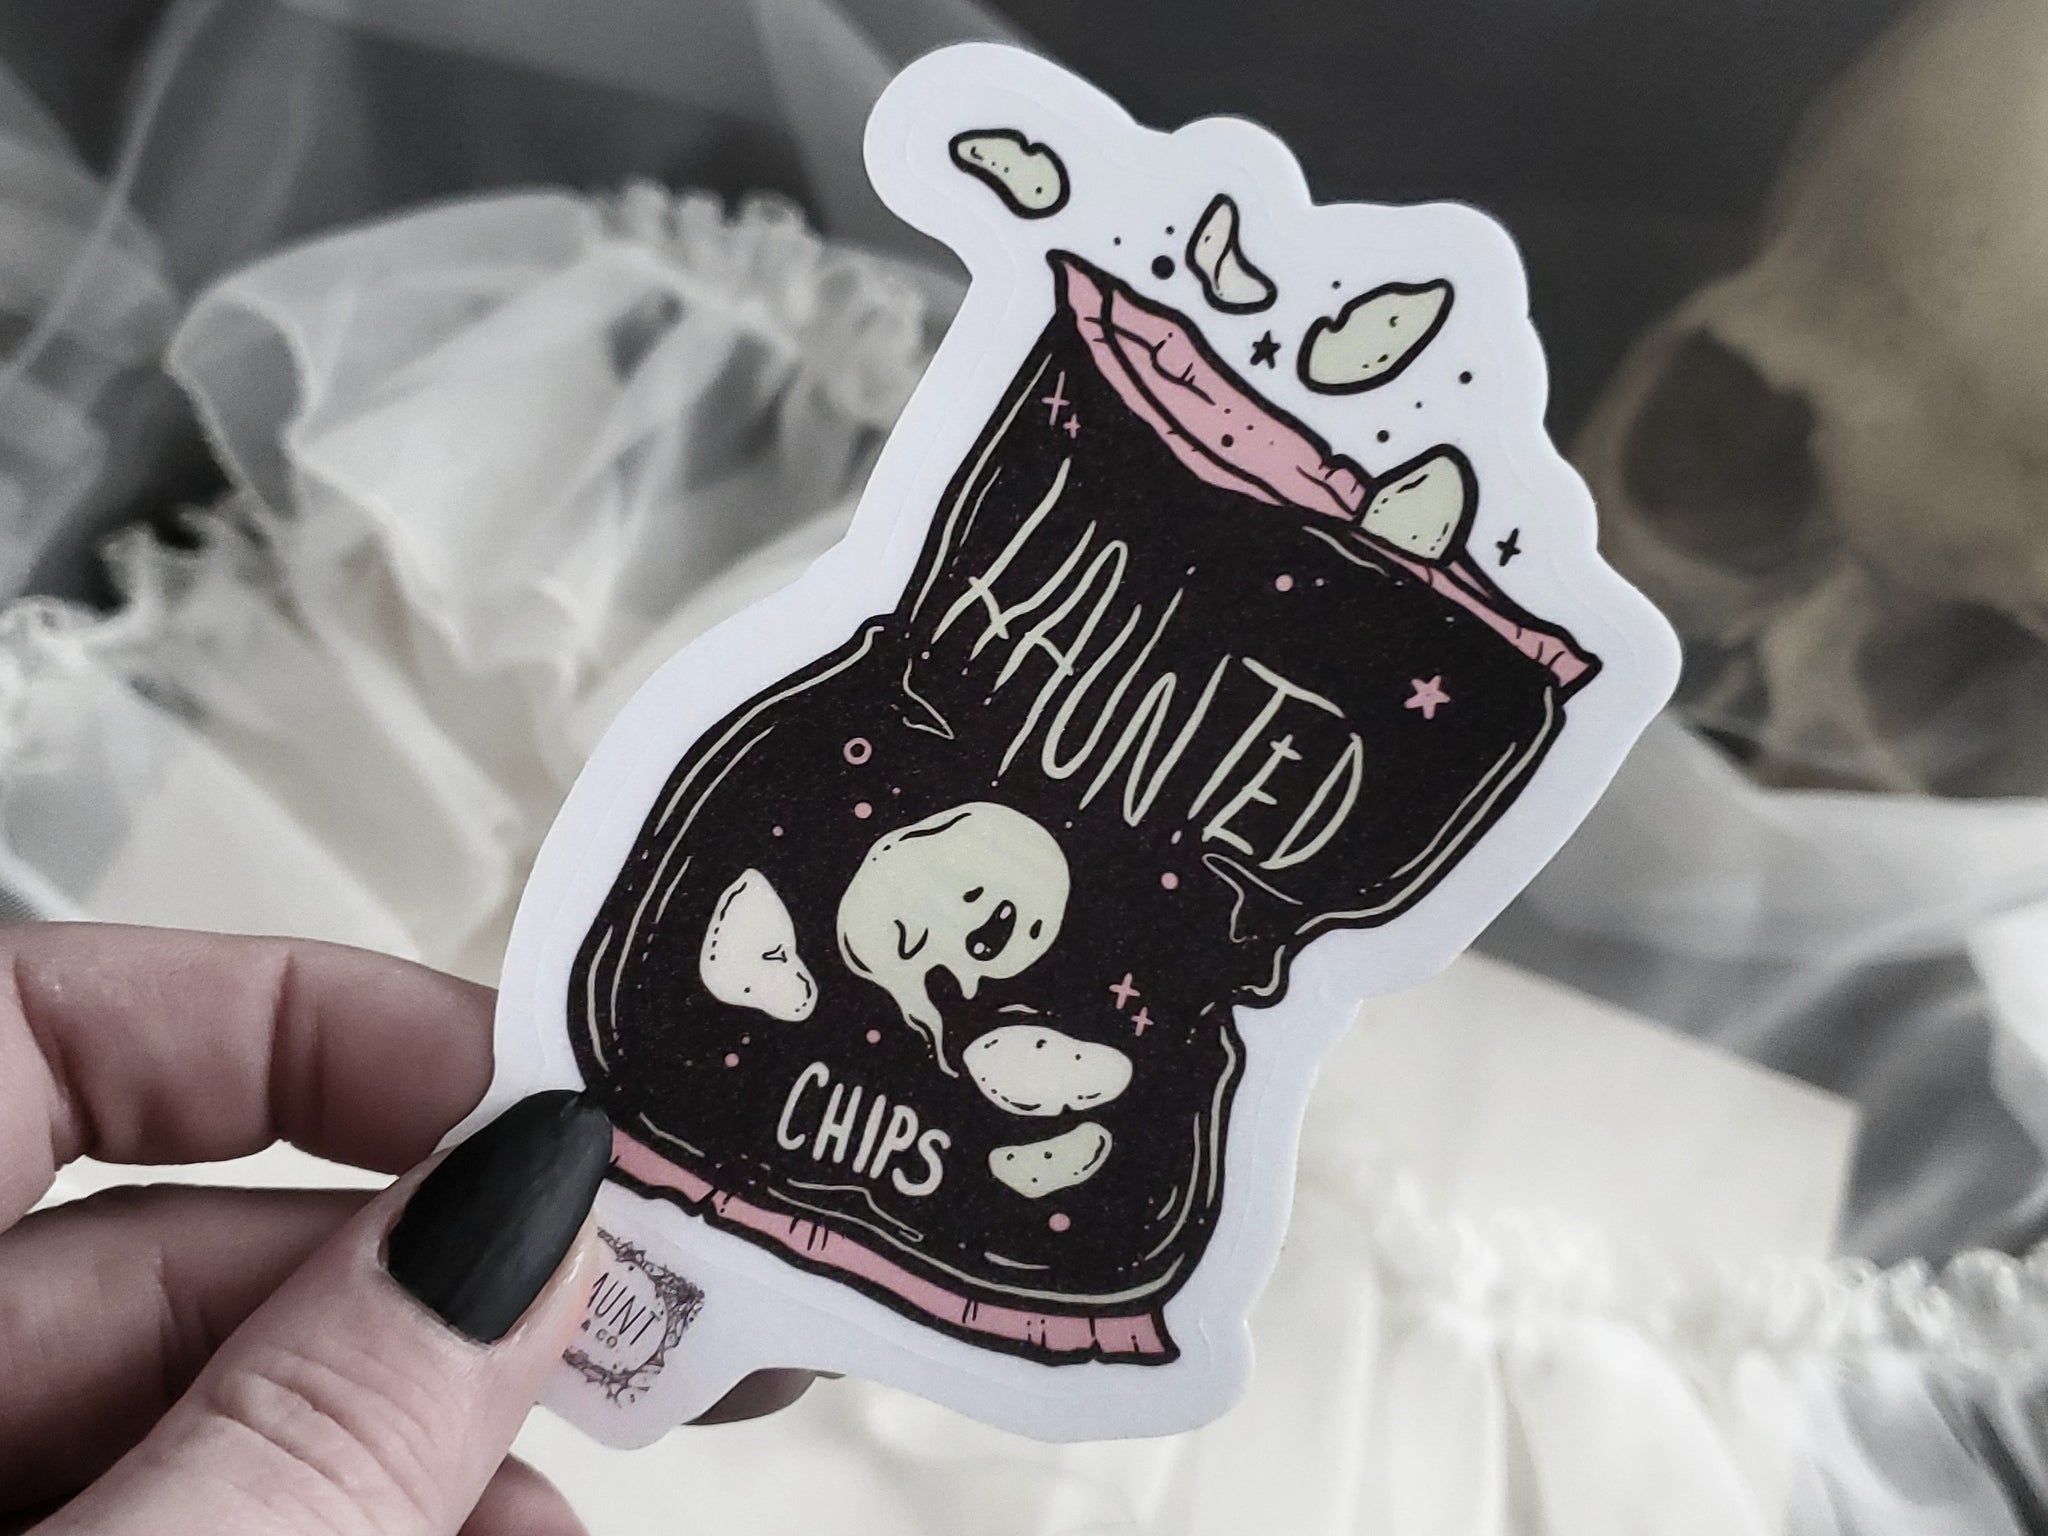 Haunted Chips Ghost Sticker - Lowbrow Misfits / White Stag Art